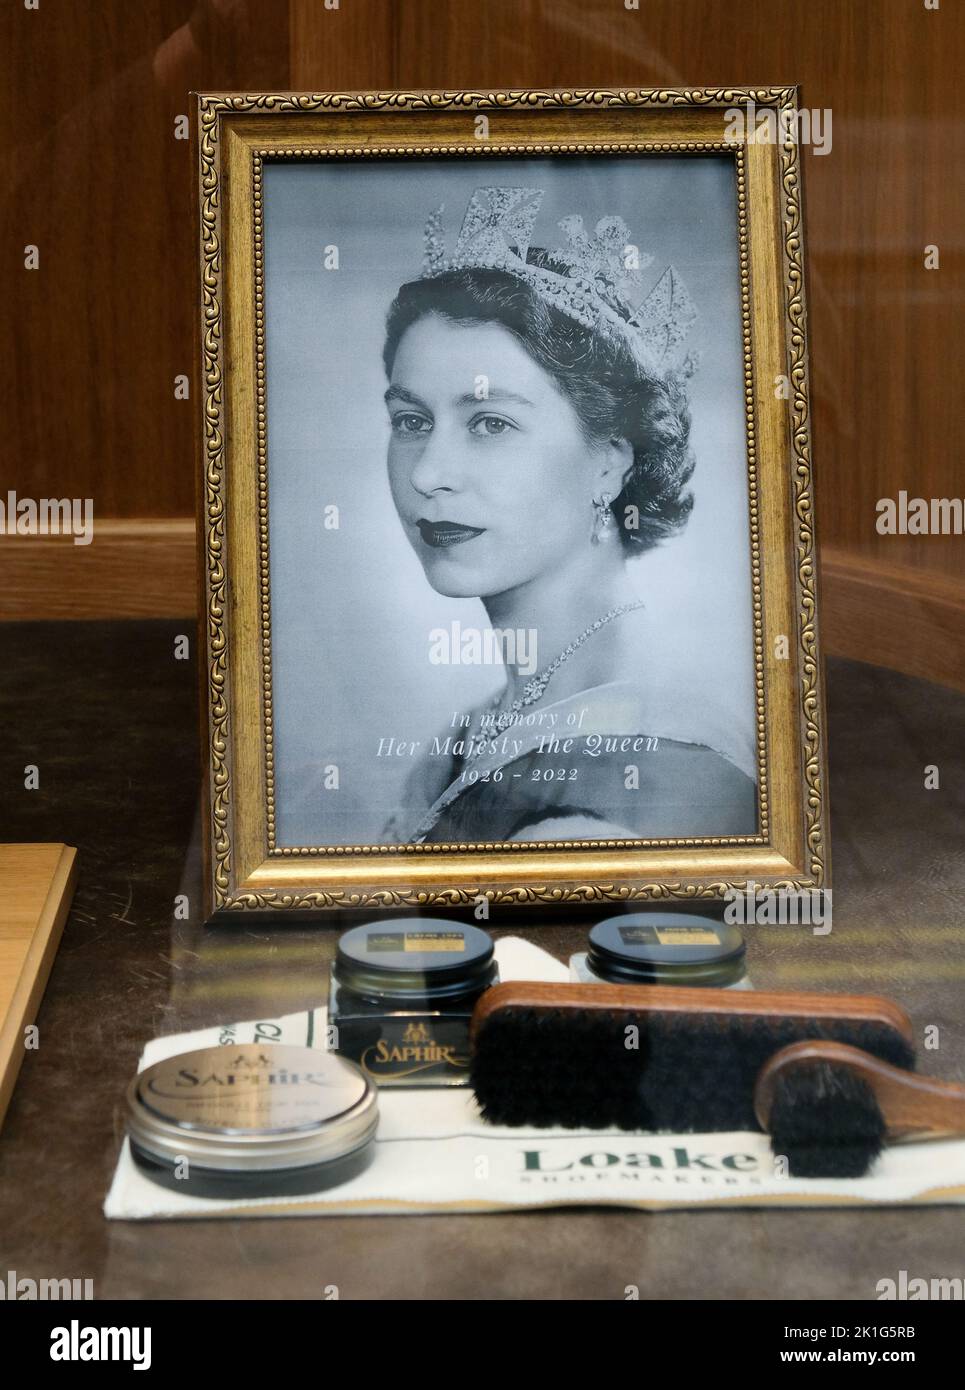 Jermyn Street, London, UK. 18th Sept 2022. Mourning the death of Queen Elizabeth II aged 96. Shop windows near Piccadilly display pictures and dedications to Queen Elizabeth. Loake, Jermyn Street. Credit: Matthew Chattle/Alamy Live News Stock Photo